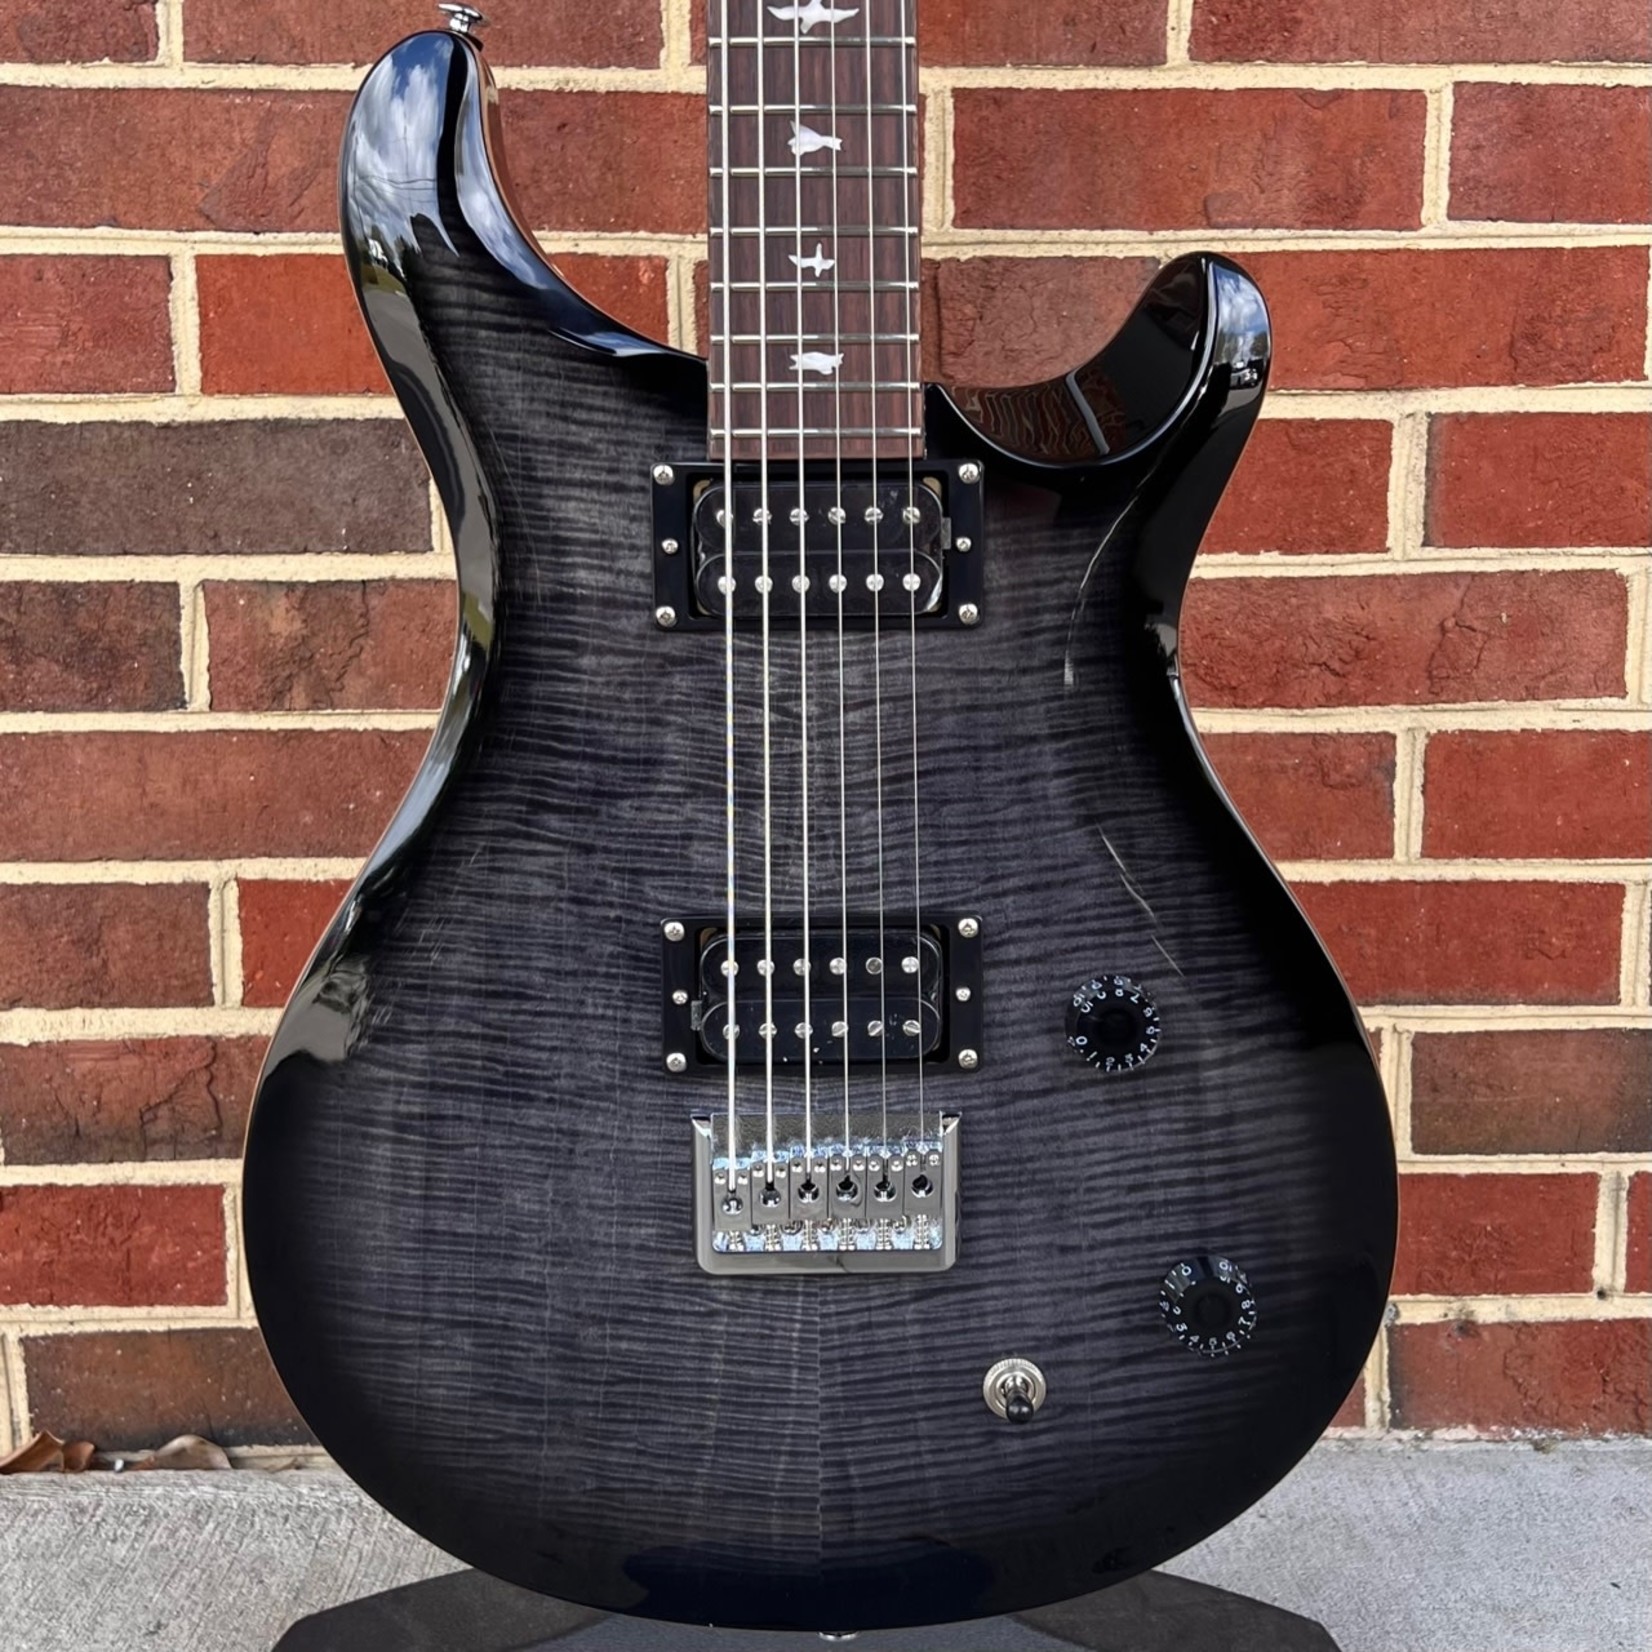 Paul Reed Smith Paul Reed Smith SE 277, Charcoal Burst, Baritone 27" Scale Length, Carved Top, Gig Bag, SN# CTIE098150